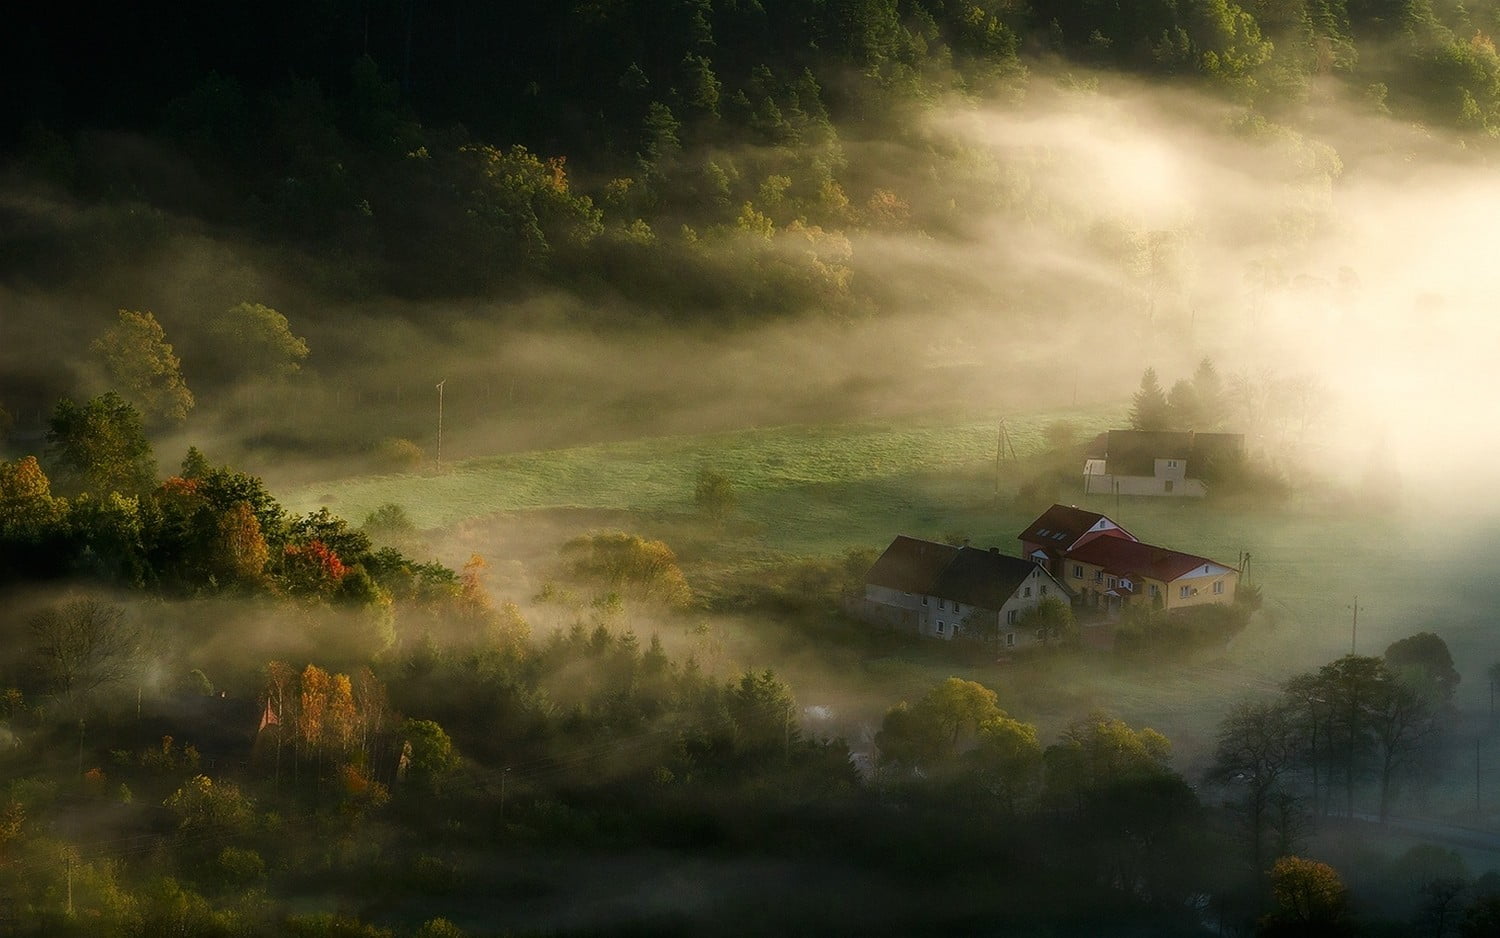 red and white house wallpaper, nature, landscape, village, mist